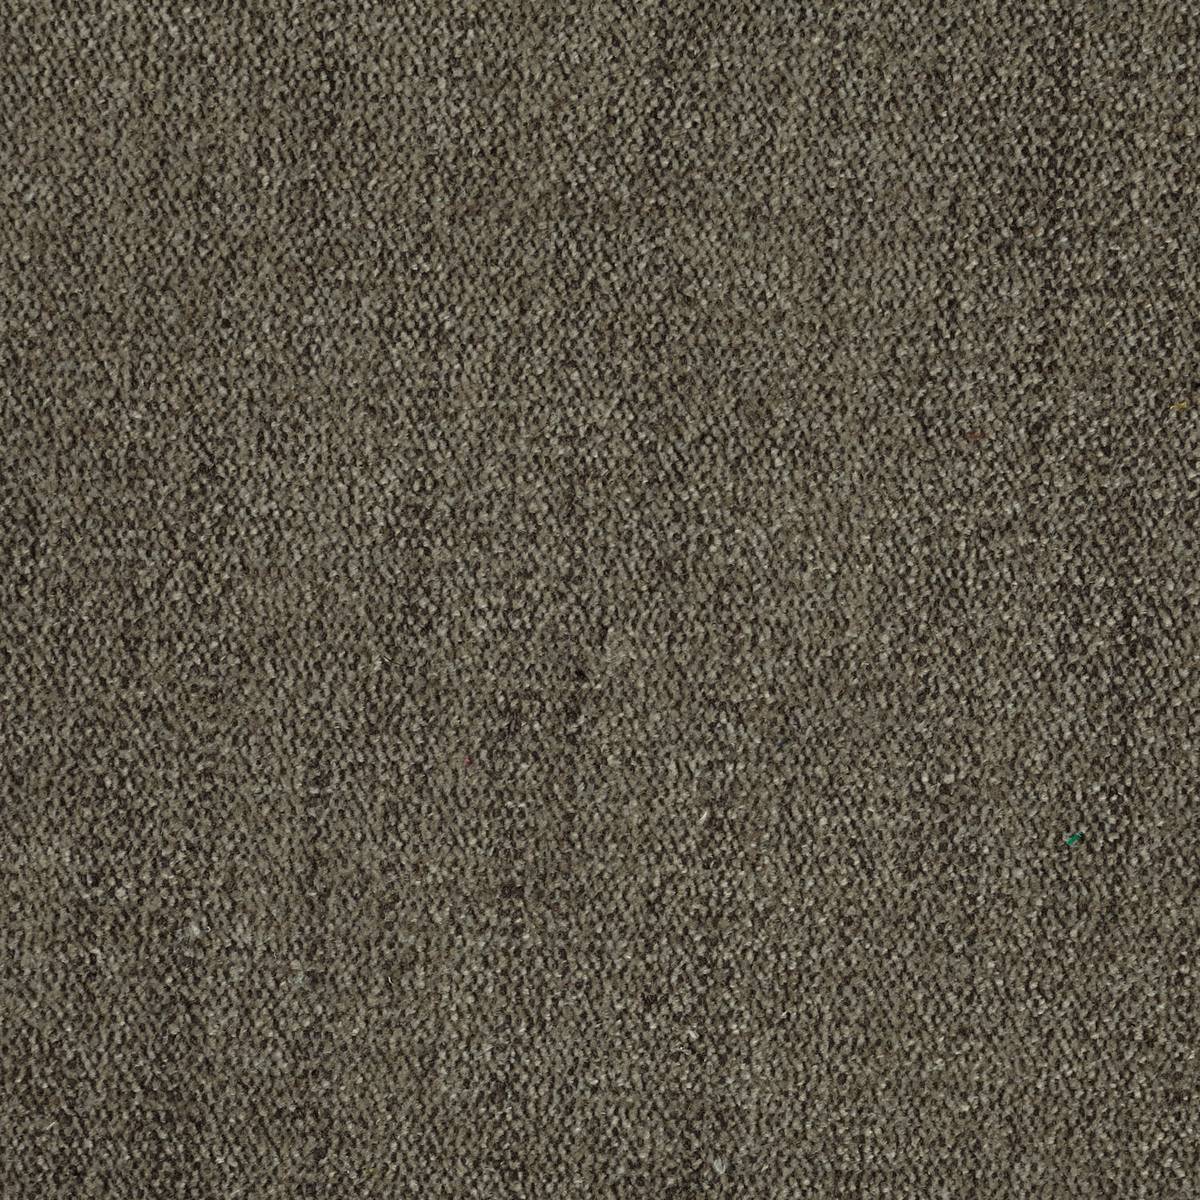 Marly Chenille Sable Fabric by Harlequin